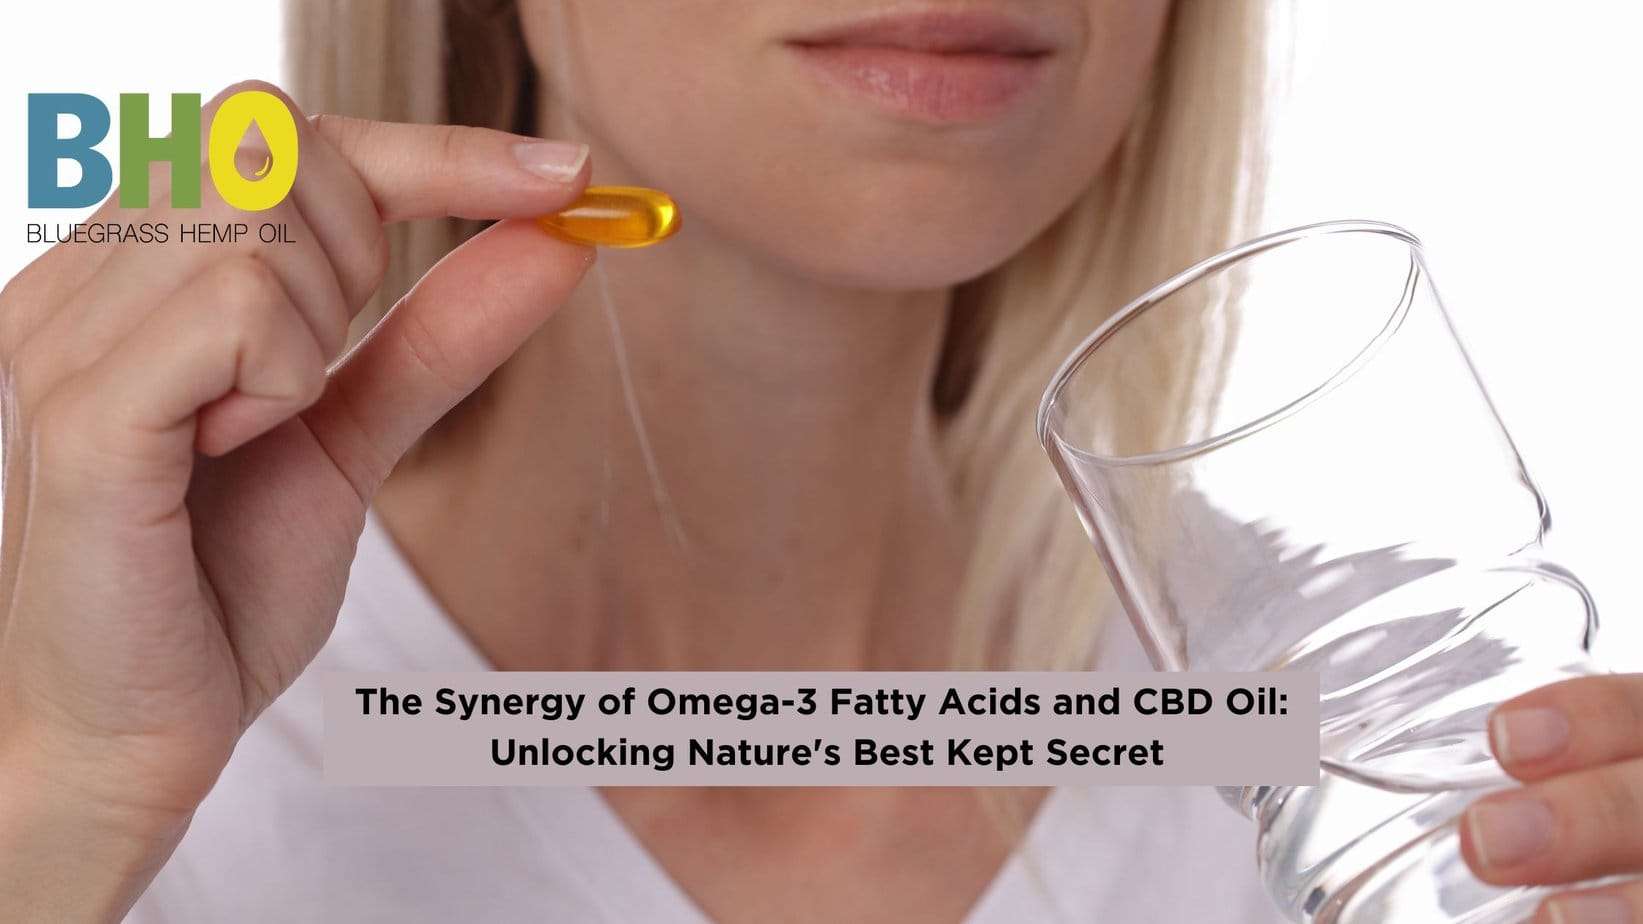 Image of a woman holding up an Omega-3 and CBD softgel capsule with a serene expression, set against a backdrop with the title 'The Synergy of Omega-3 Fatty Acids and CBD Oil: Unlocking Nature's Best Kept Secret' on a blog banner.